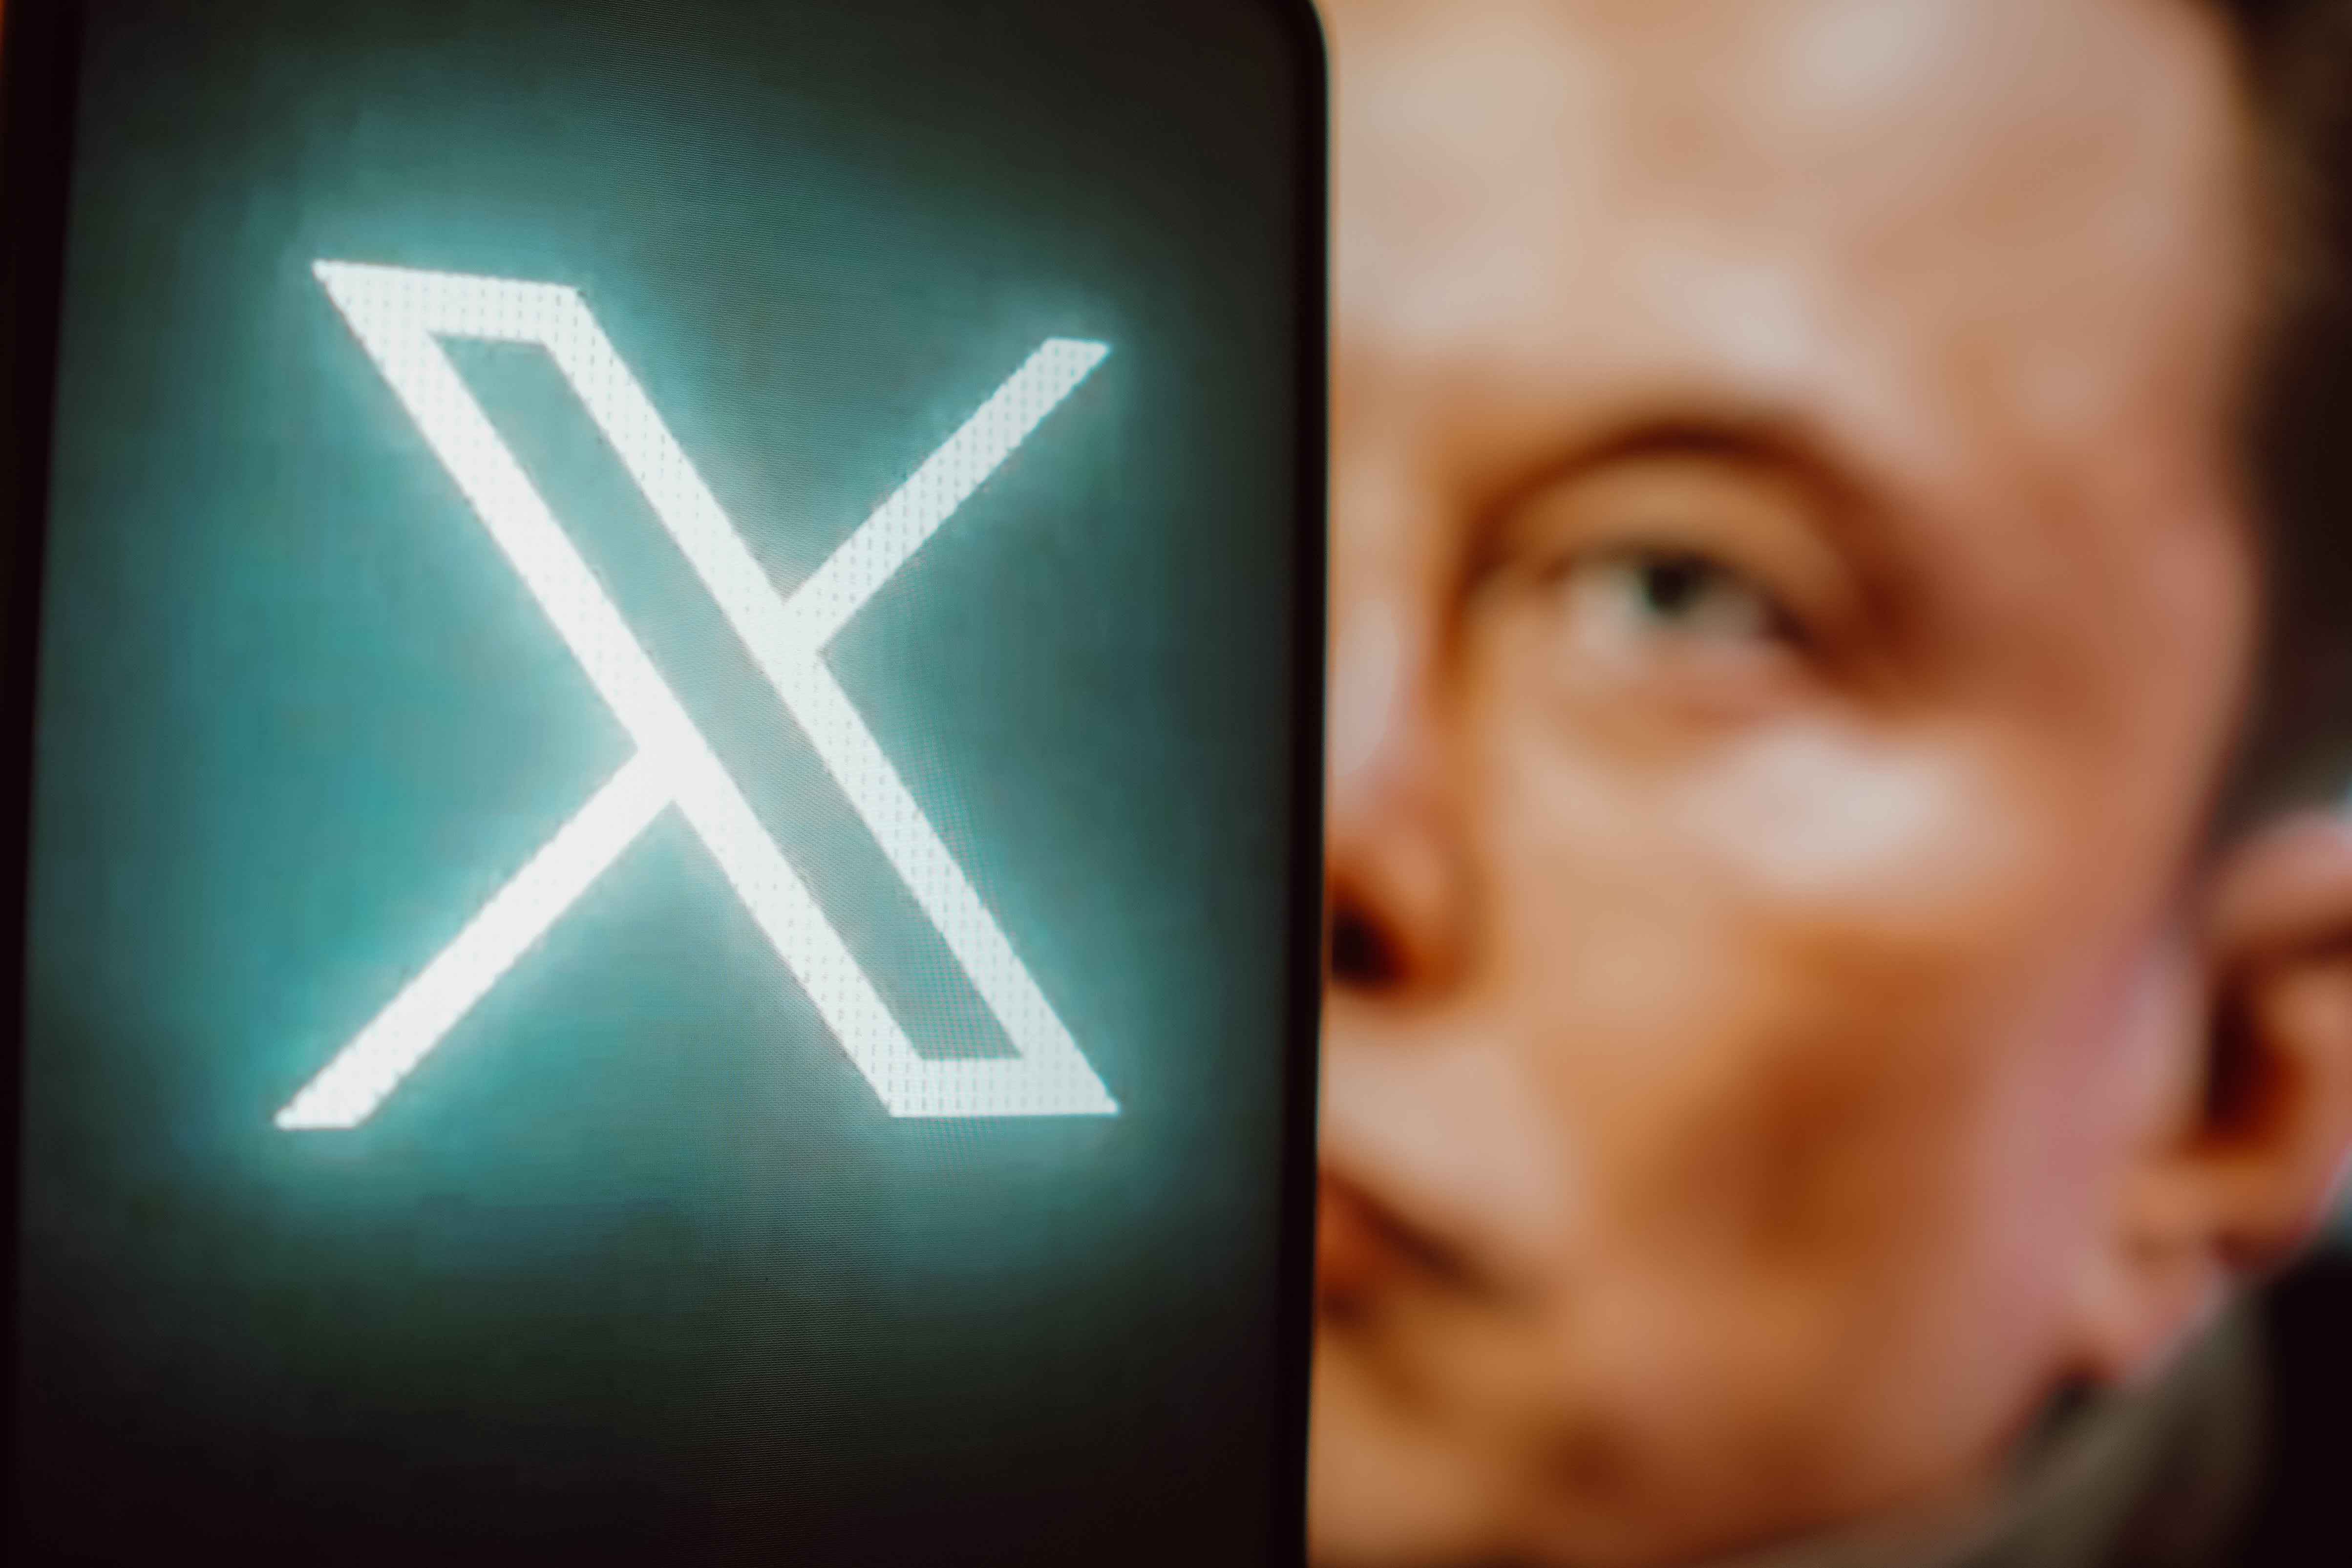 X, formerly Twitter, will launch two new subscription tiers, Elon Musk says